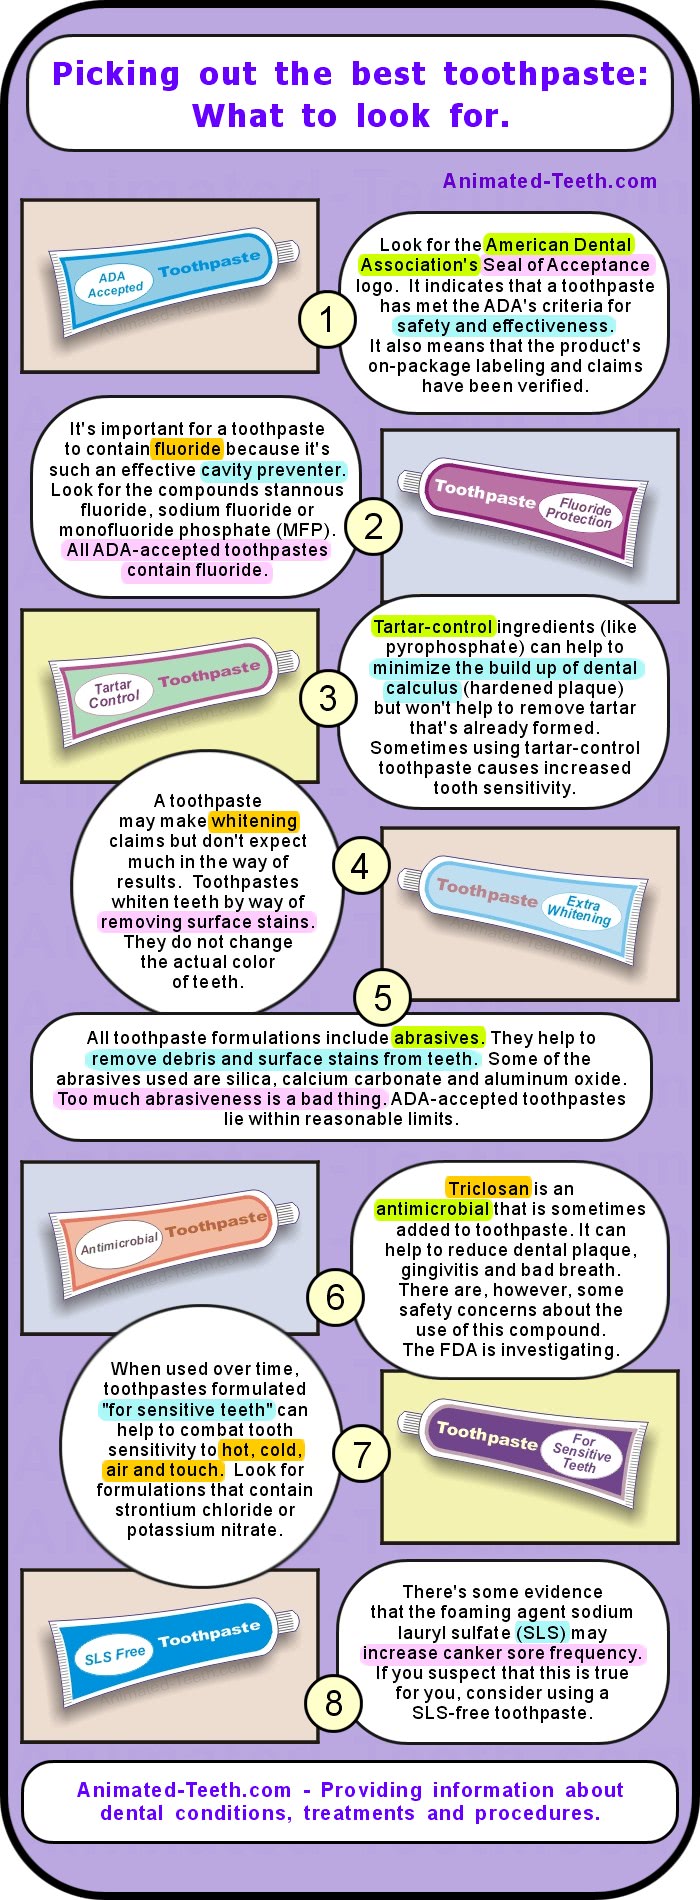 Infographic: How to choose the best toothpaste.